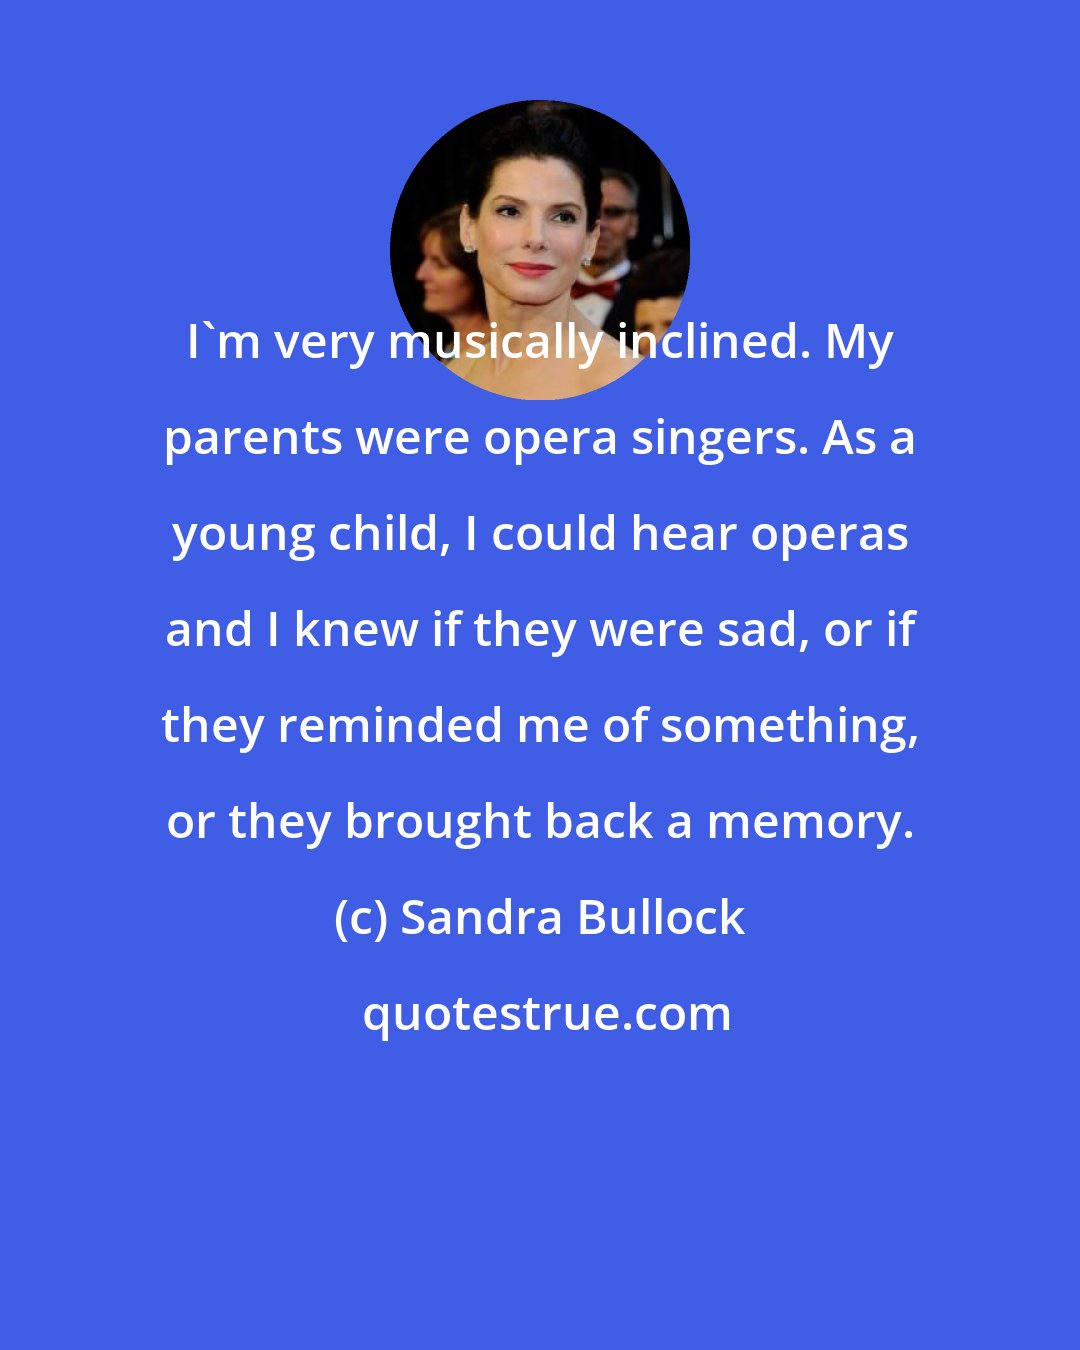 Sandra Bullock: I'm very musically inclined. My parents were opera singers. As a young child, I could hear operas and I knew if they were sad, or if they reminded me of something, or they brought back a memory.